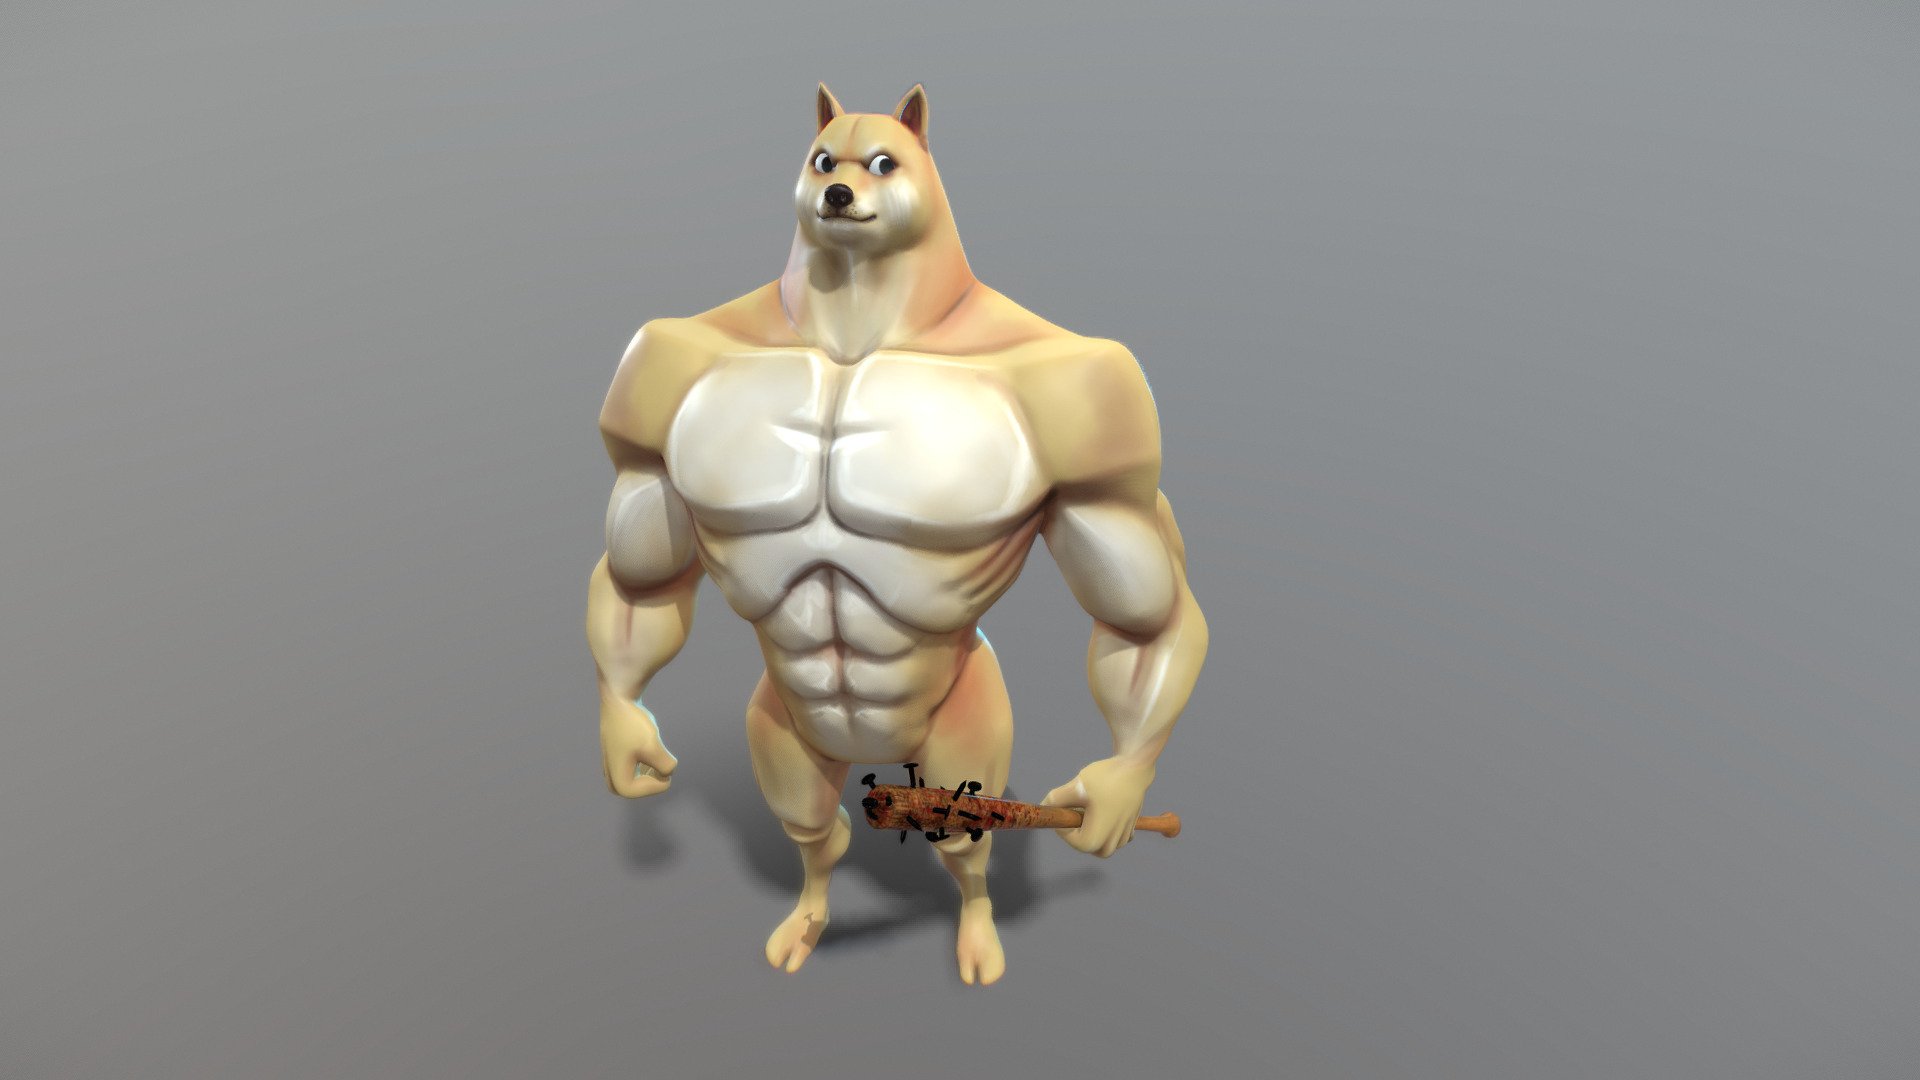 the file contains the .stl file for 3d Printing the &ldquo;doge